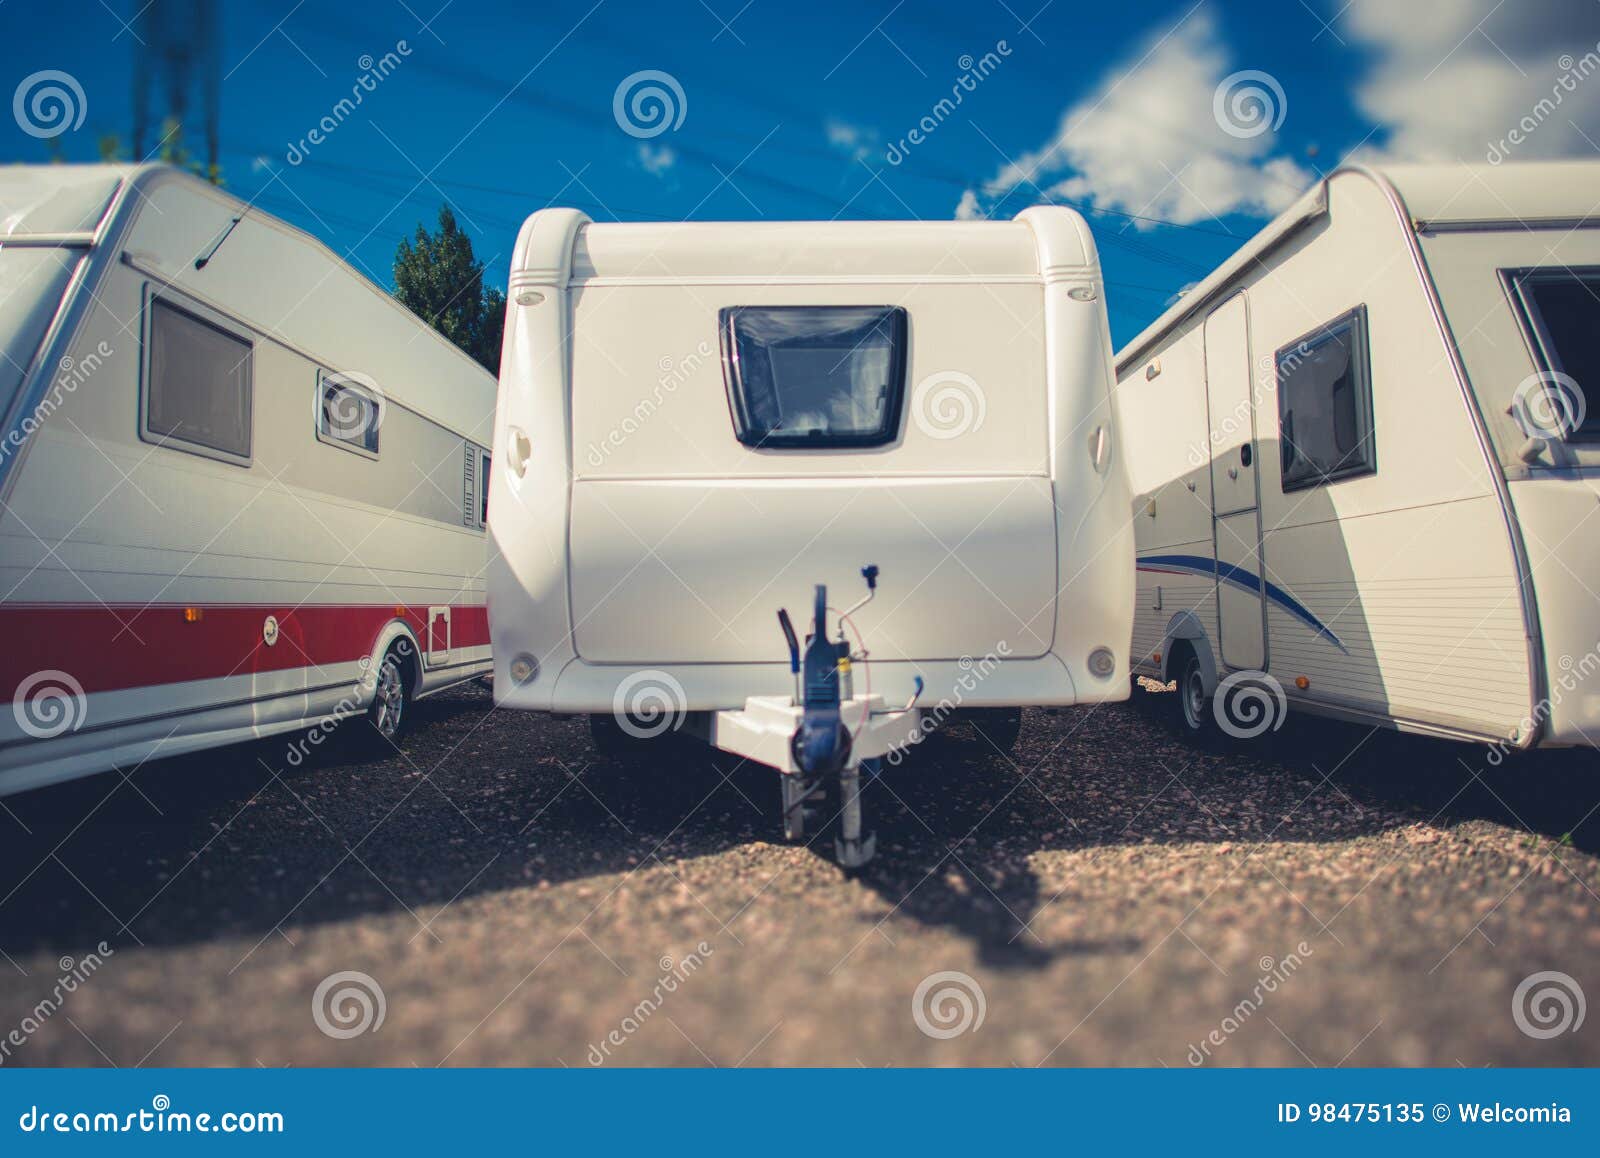 pre owned travel trailers